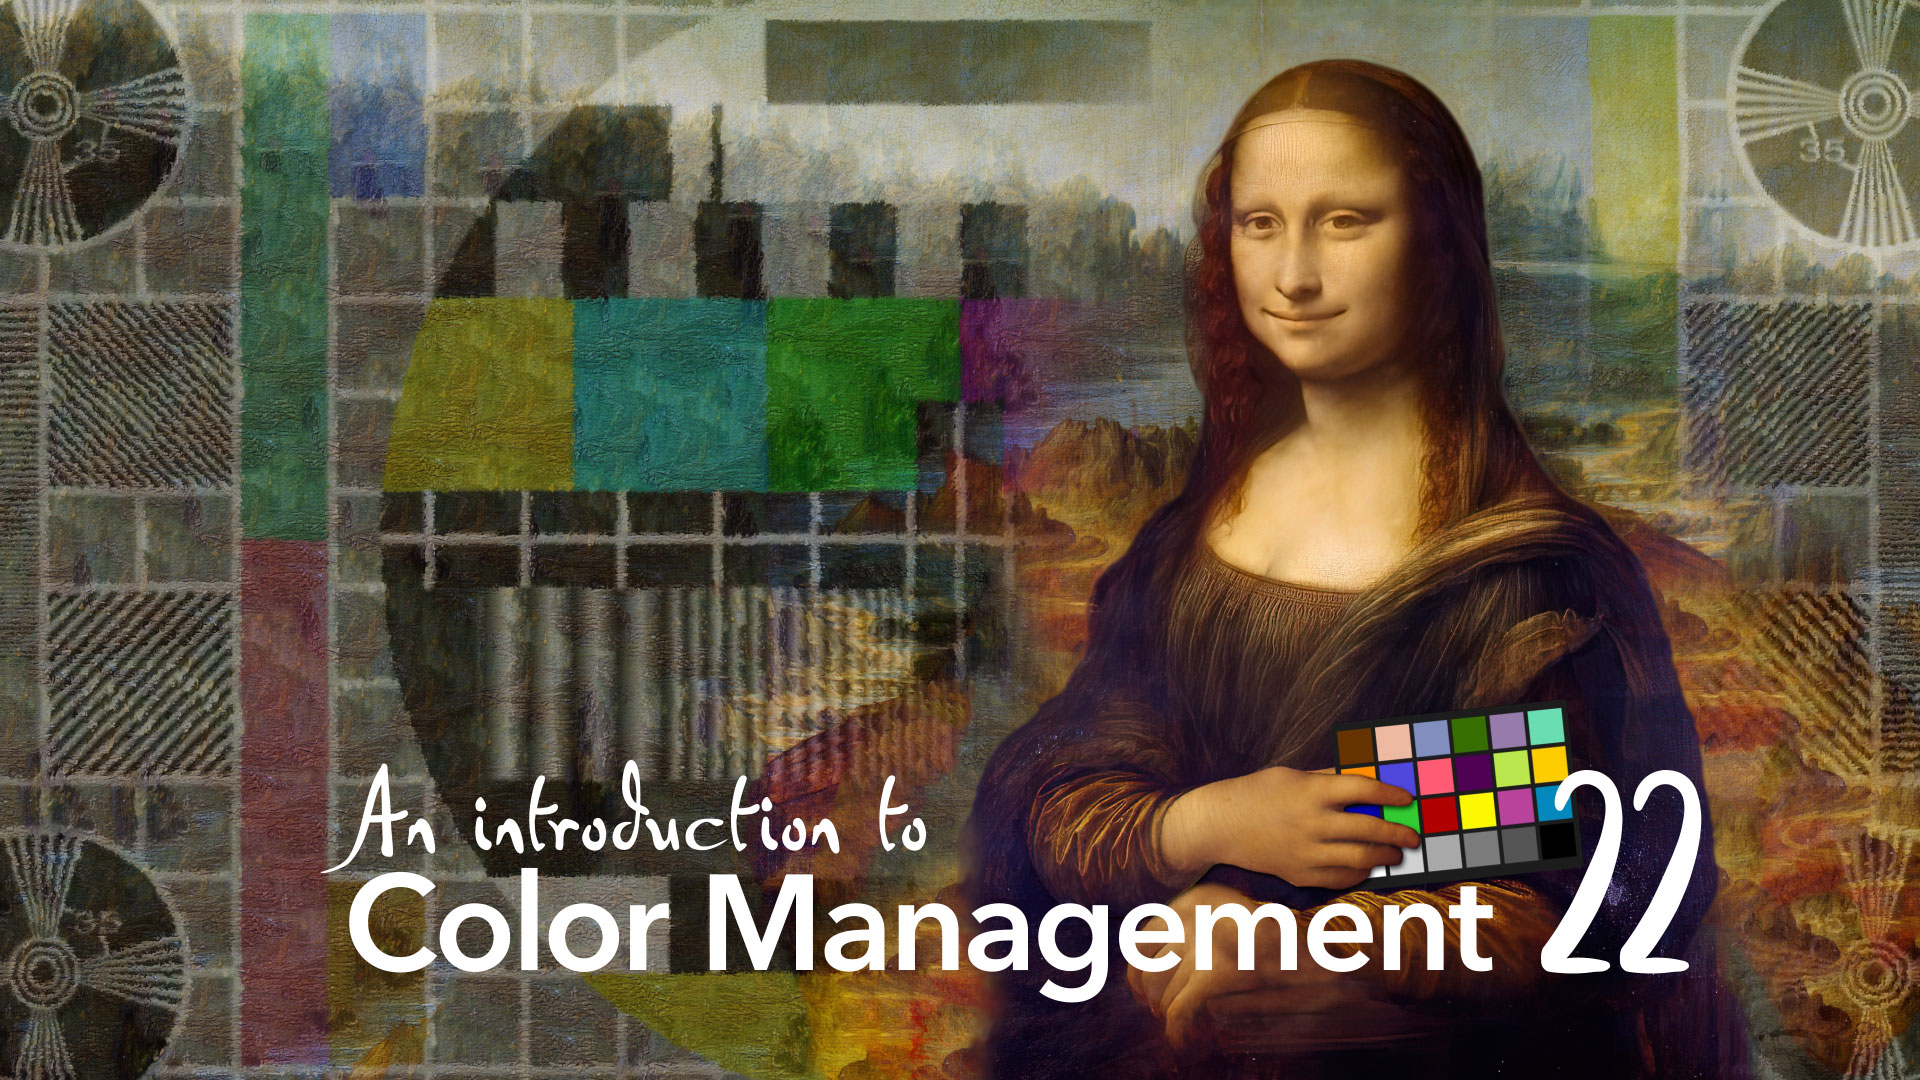 Color Management Part 22: Introducing Tone Mapping 13